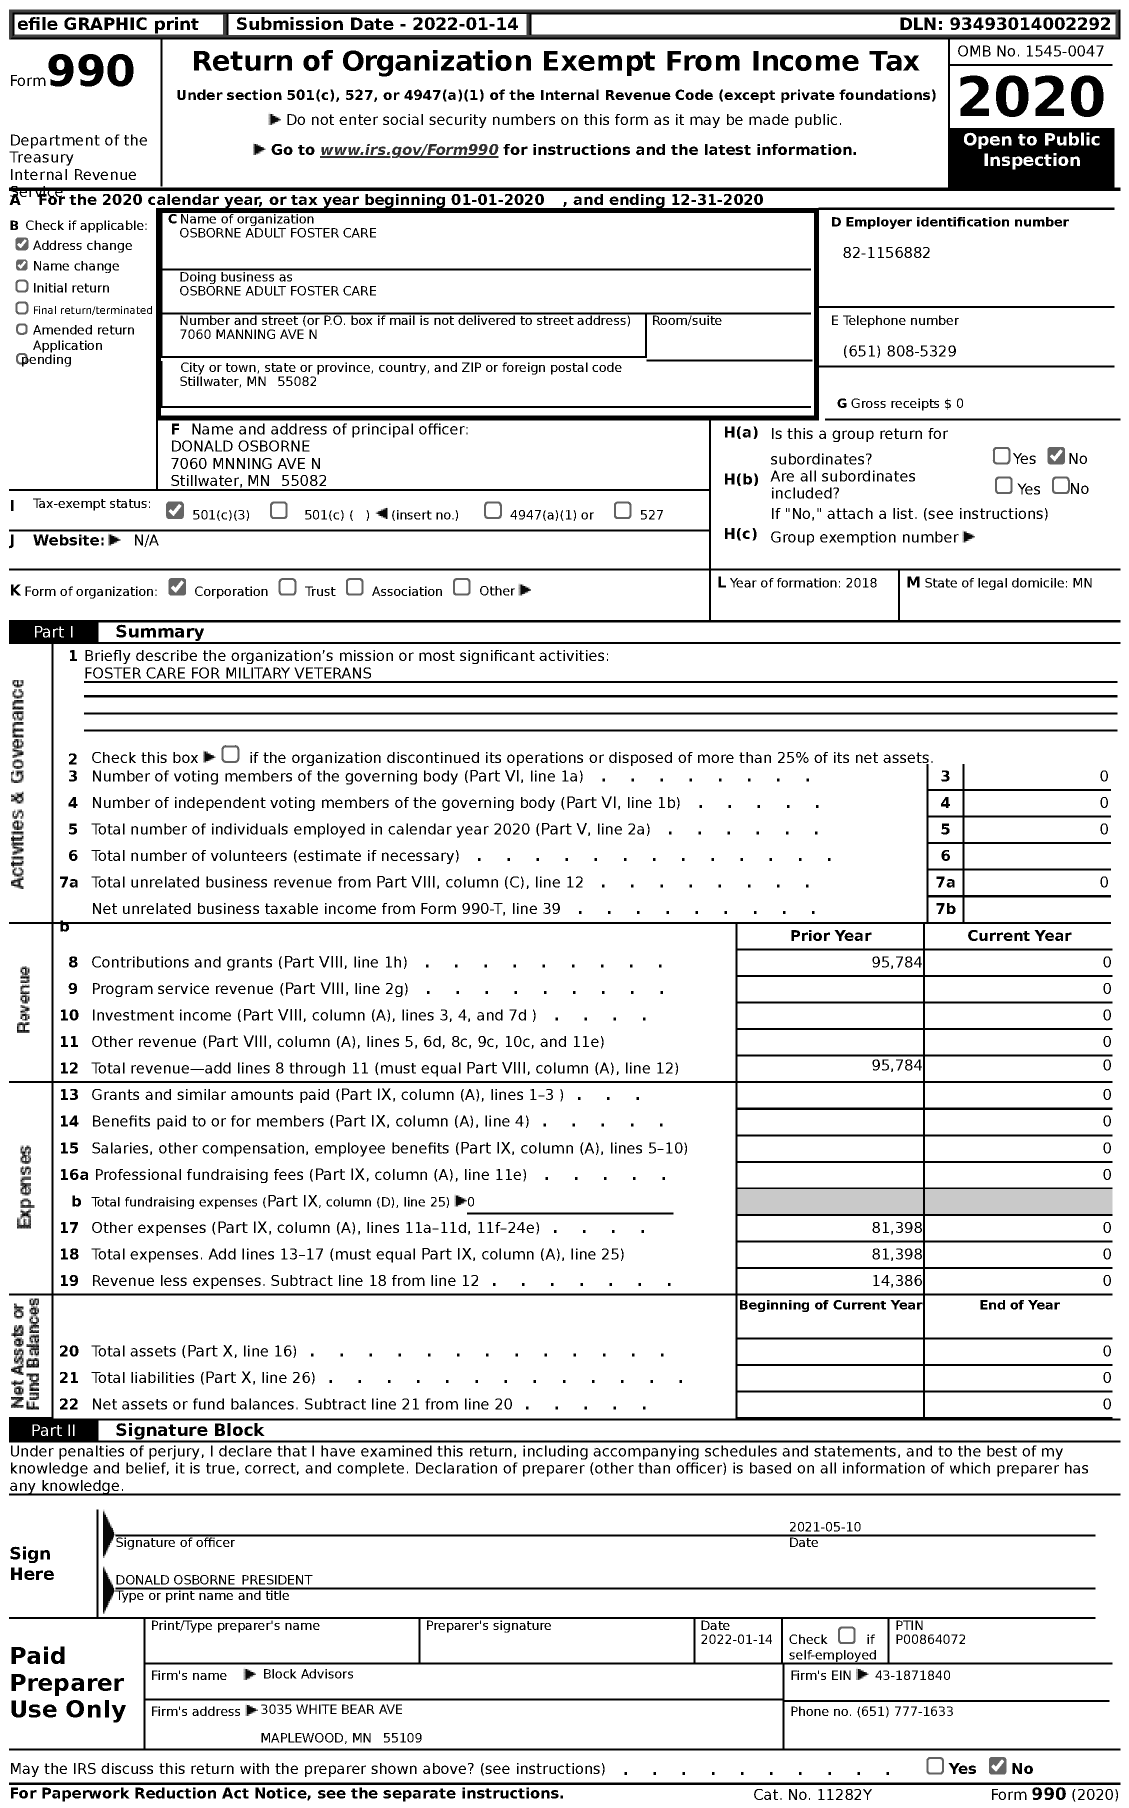 Image of first page of 2020 Form 990 for Osborne Adult Foster Care